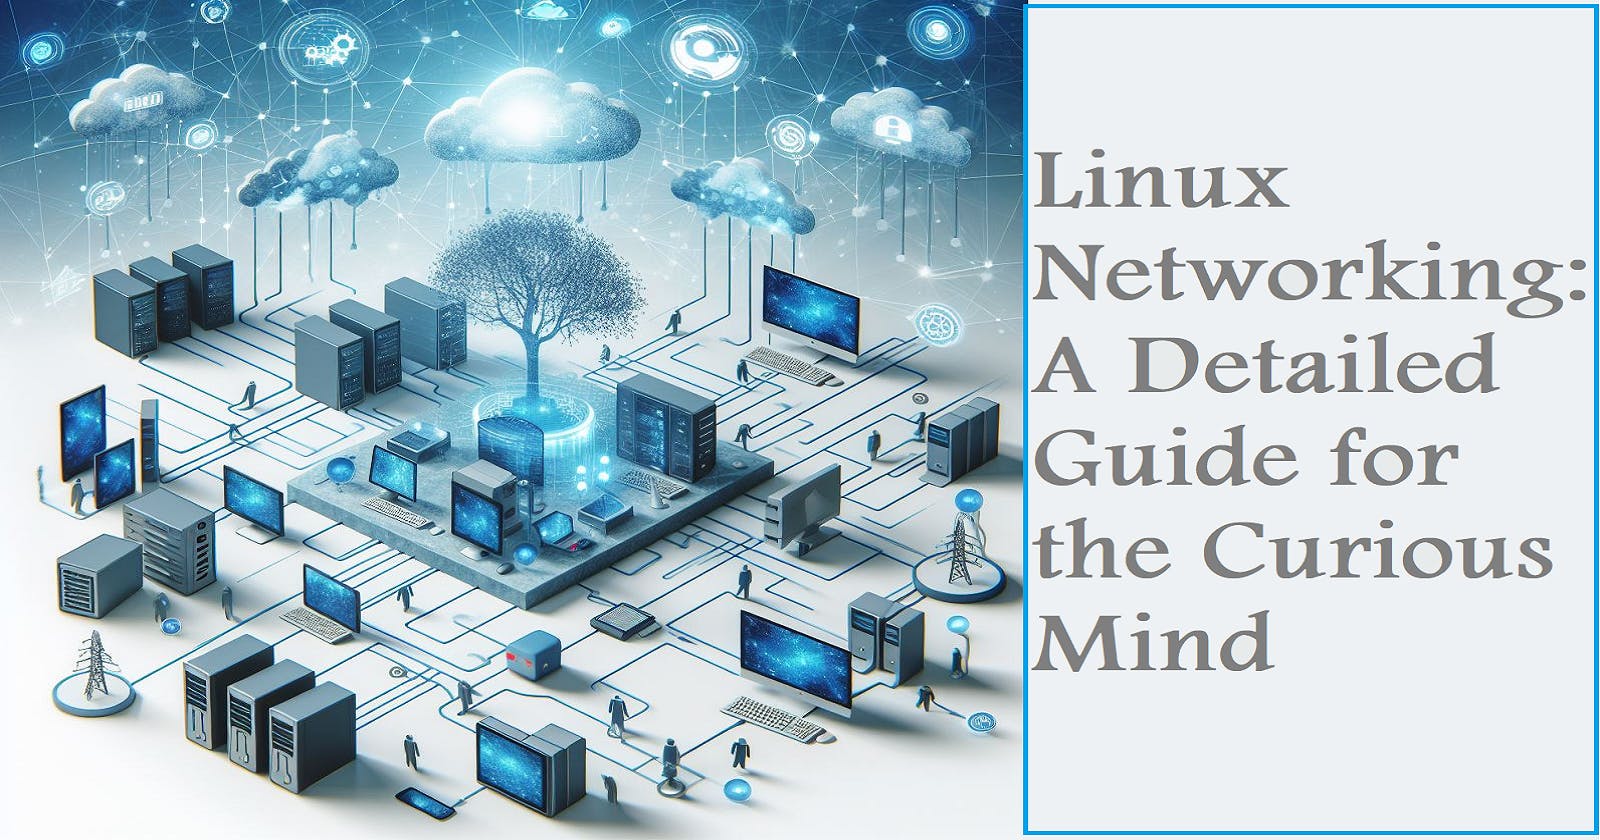 Linux Networking: A Detailed Guide for the Curious Mind